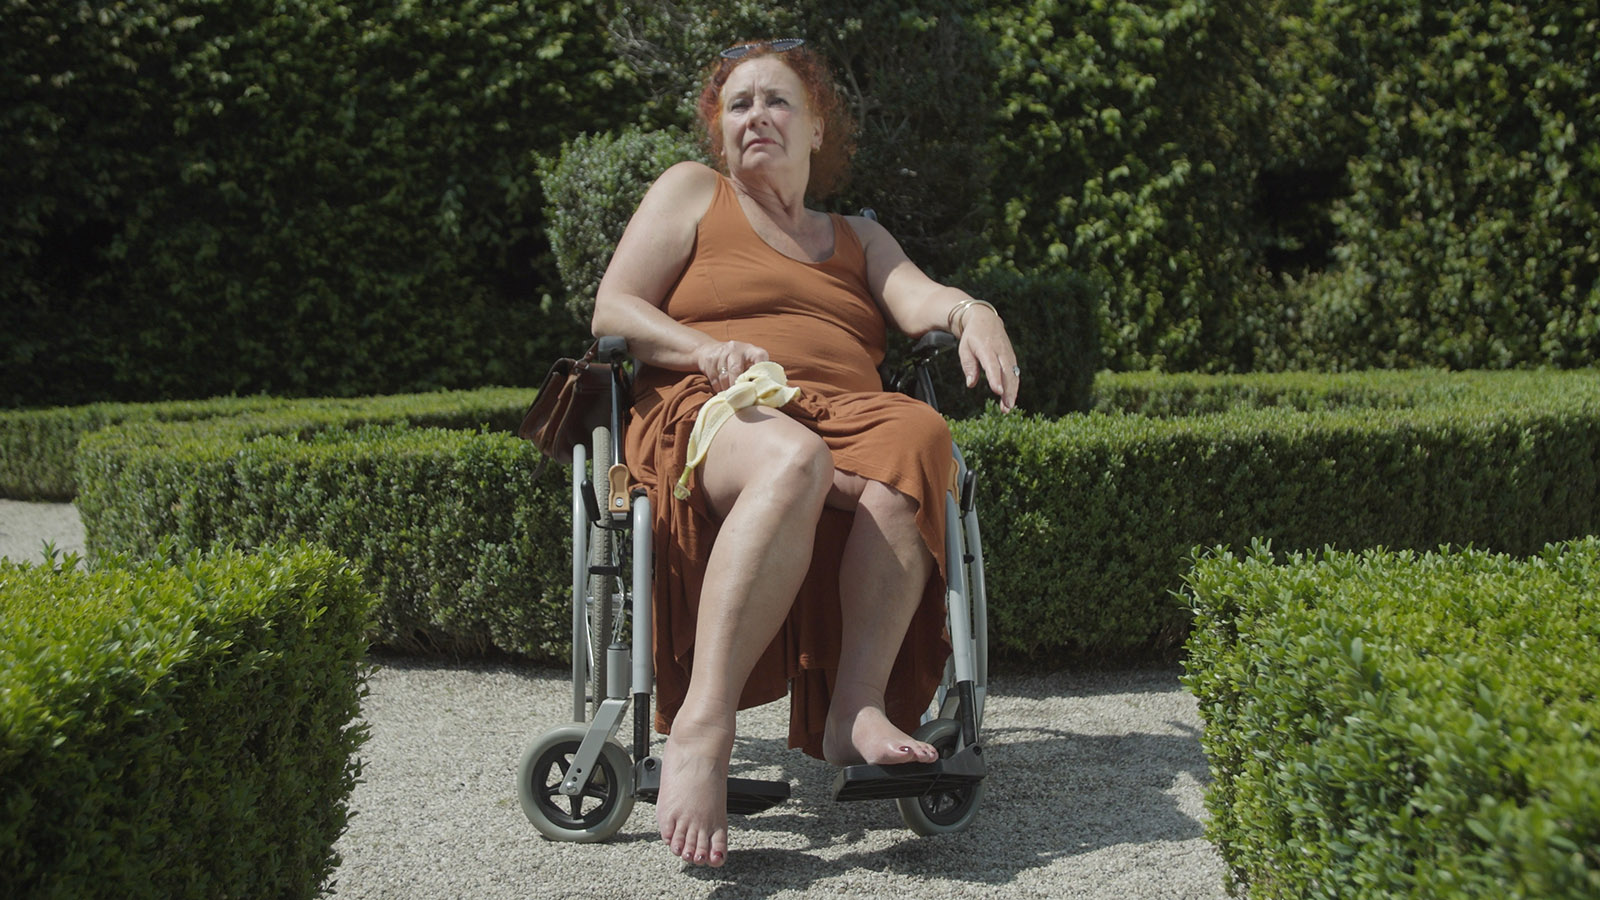 Barefooted person in rust colored dress sitting in a wheelchair placed in a garden. One arm is holding a brown handbag and a half-peeled banana.